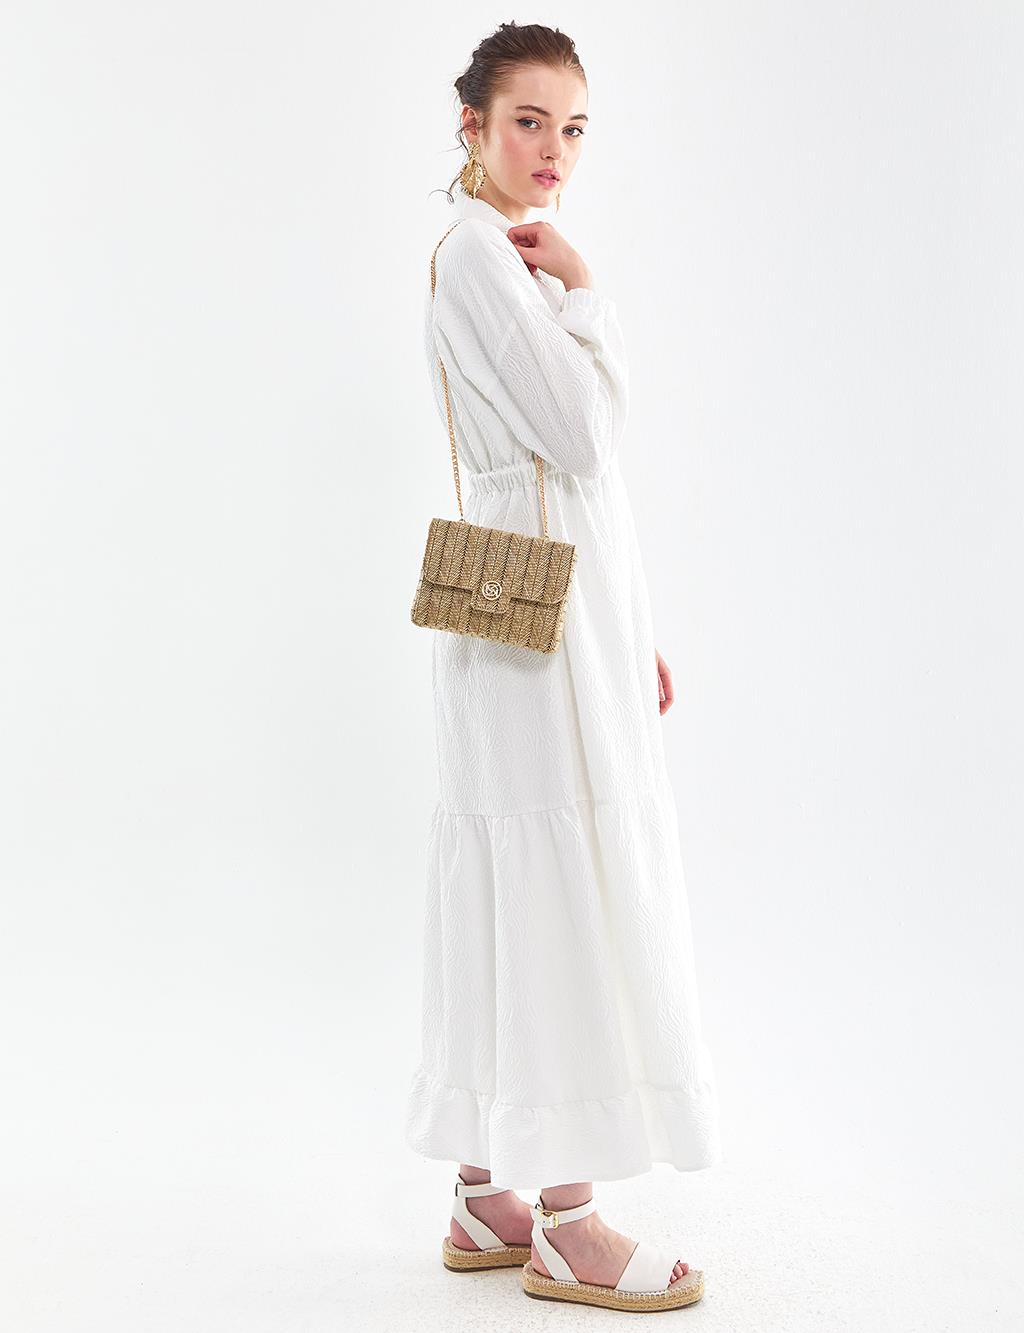 Layered Relief Pattern Dress White